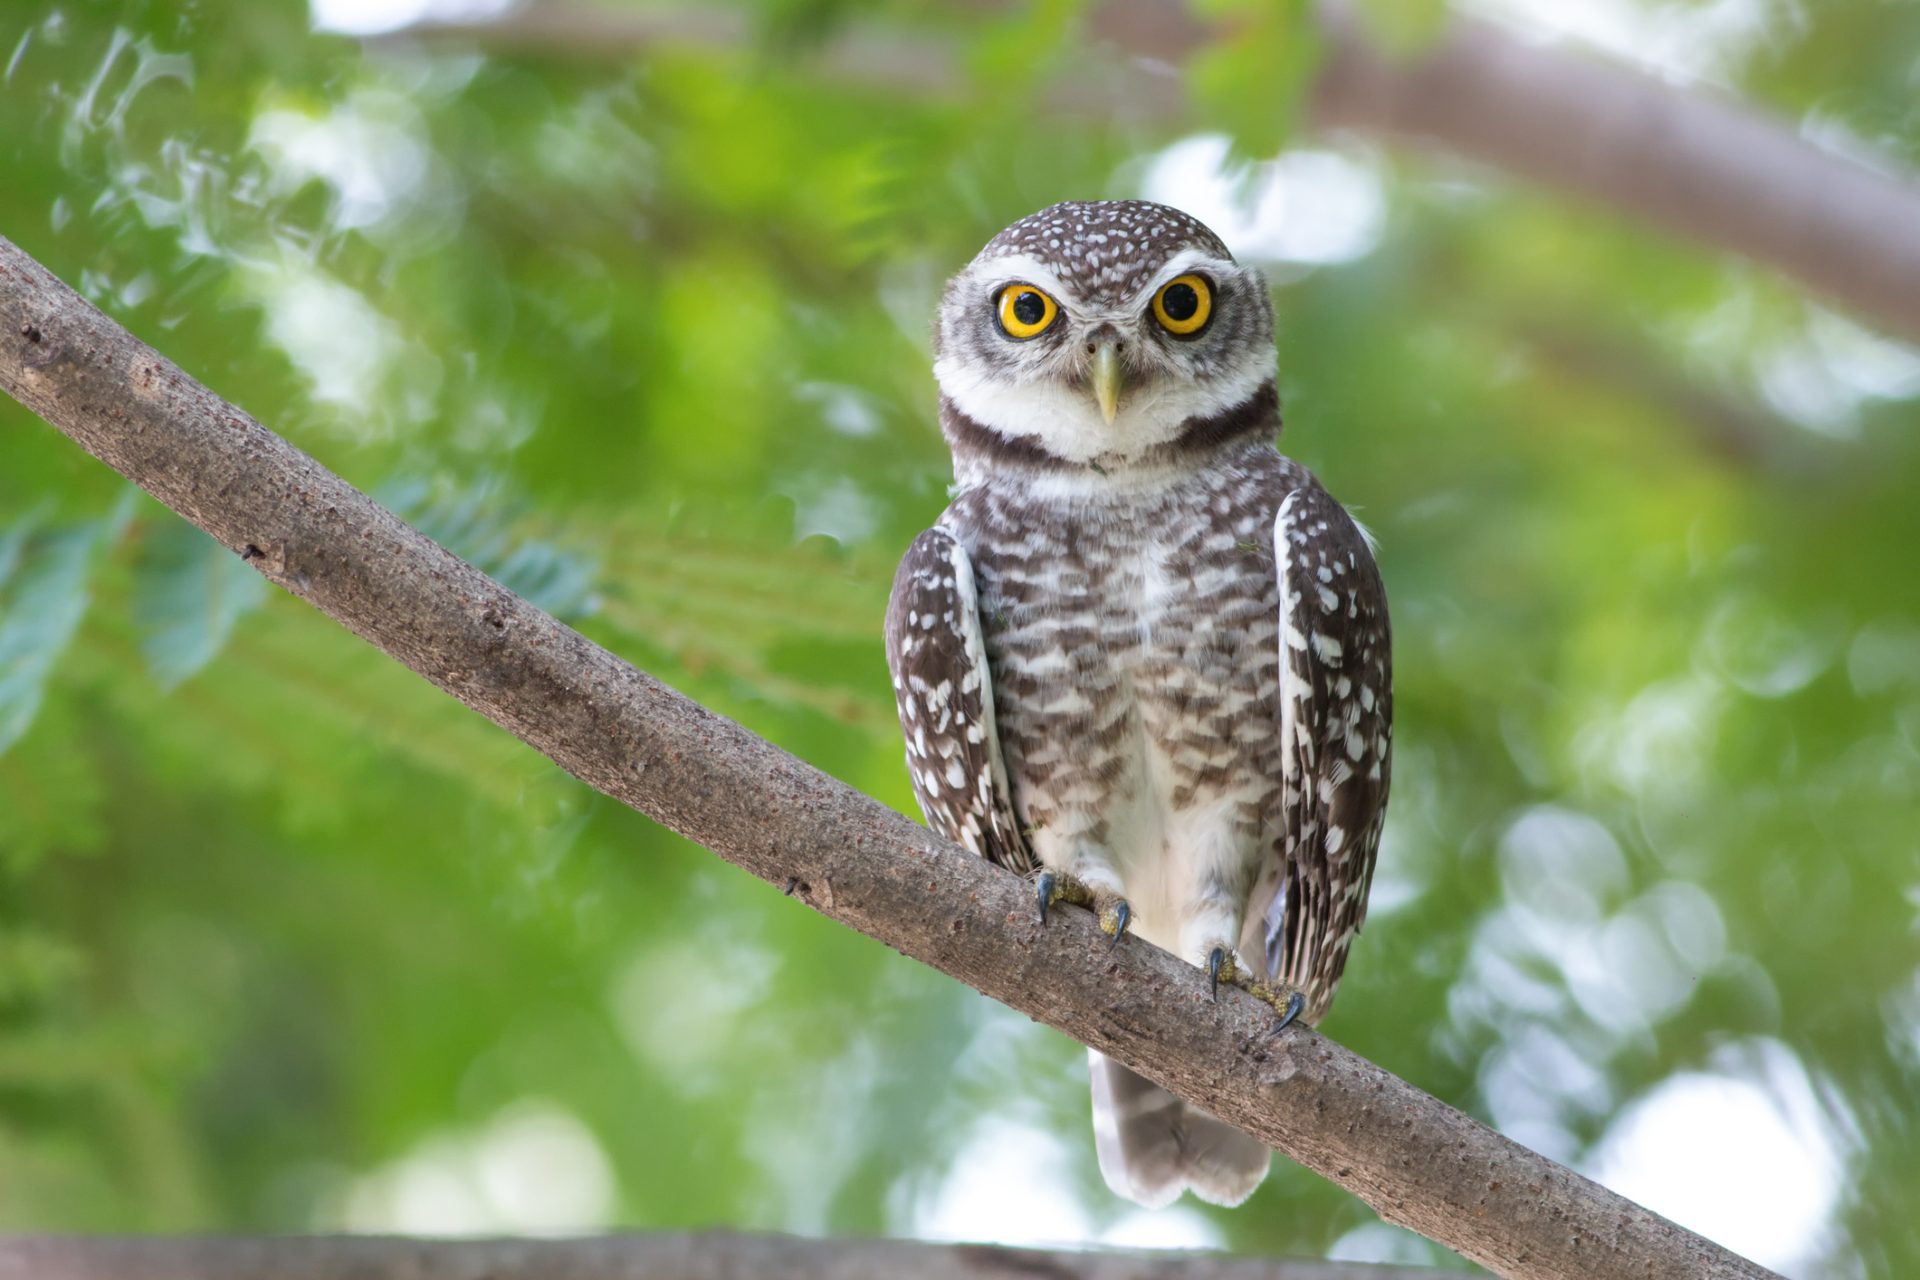 The U.S. government plans to kill half a million owls, but why?